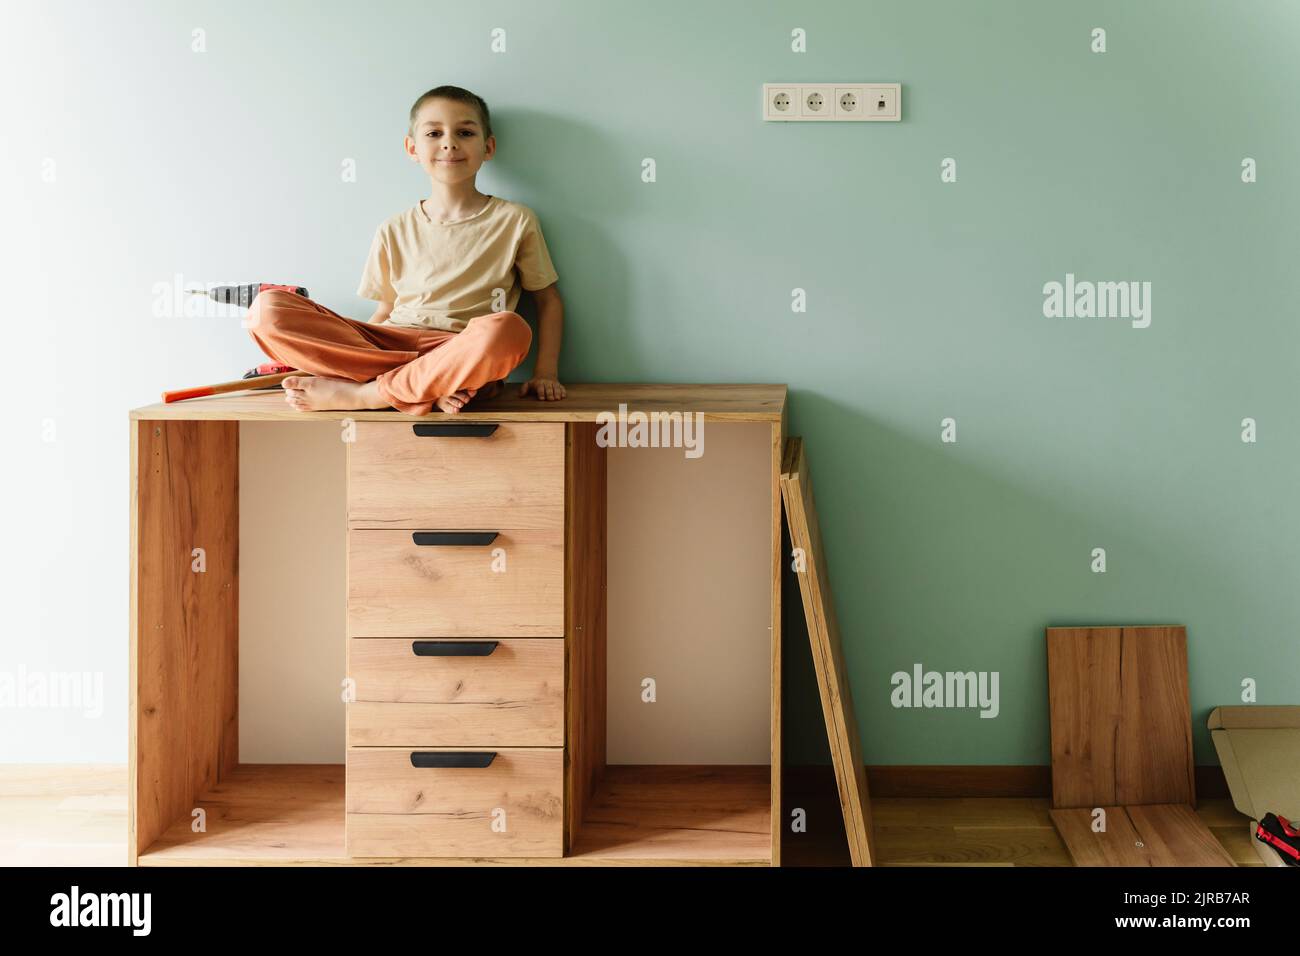 Smiling boy sitting on cabinet in front of wall at home Stock Photo